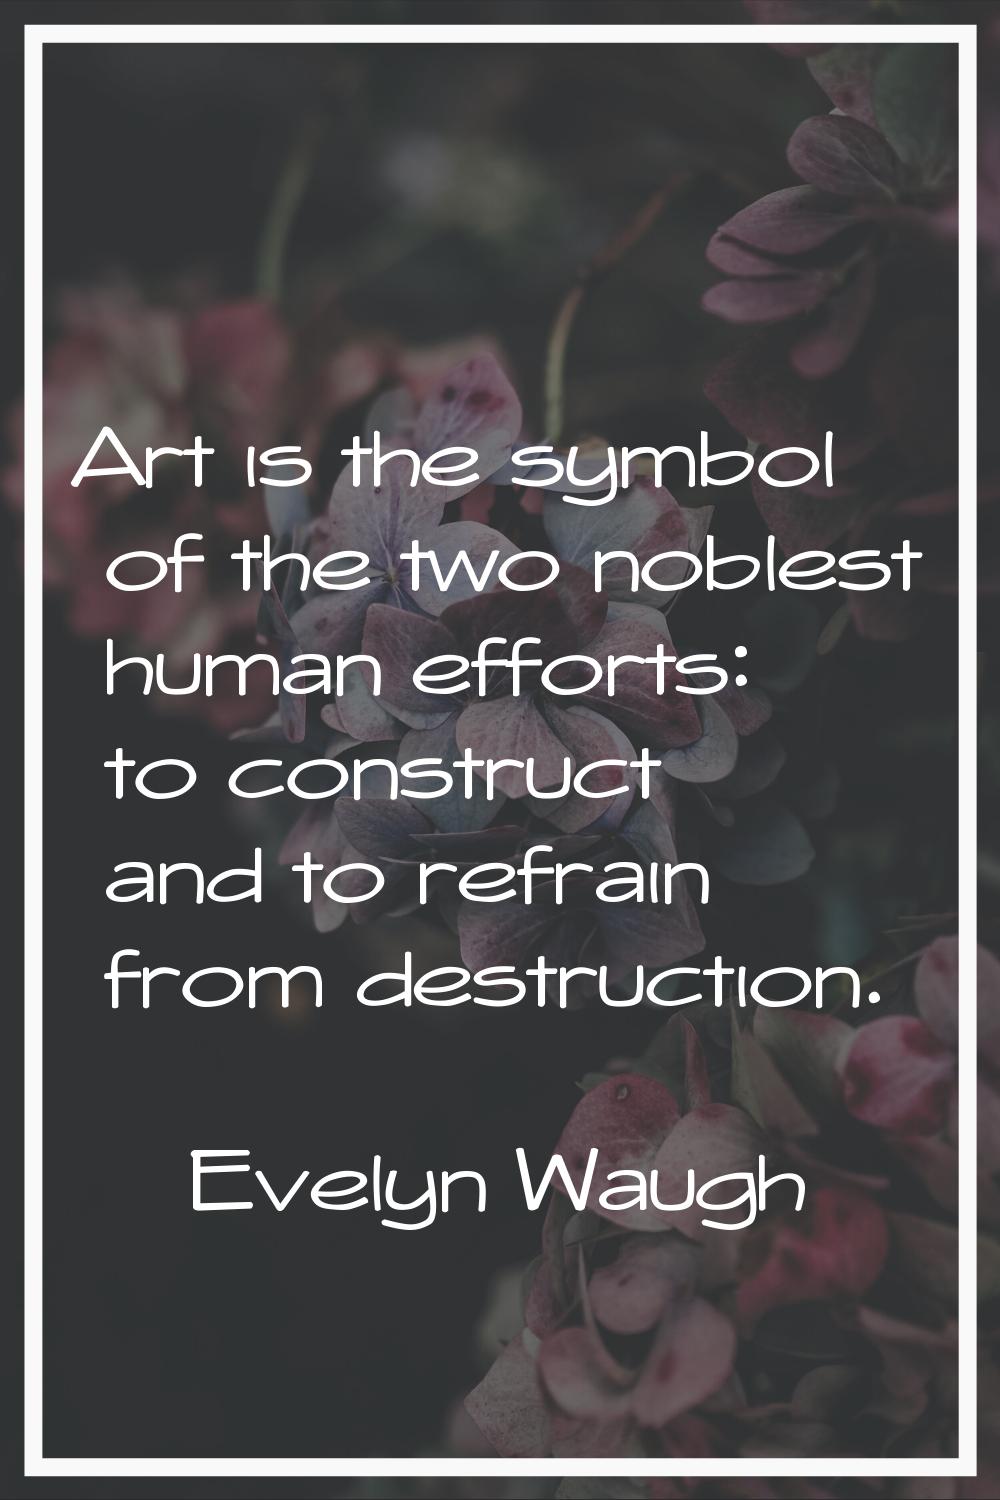 Art is the symbol of the two noblest human efforts: to construct and to refrain from destruction.